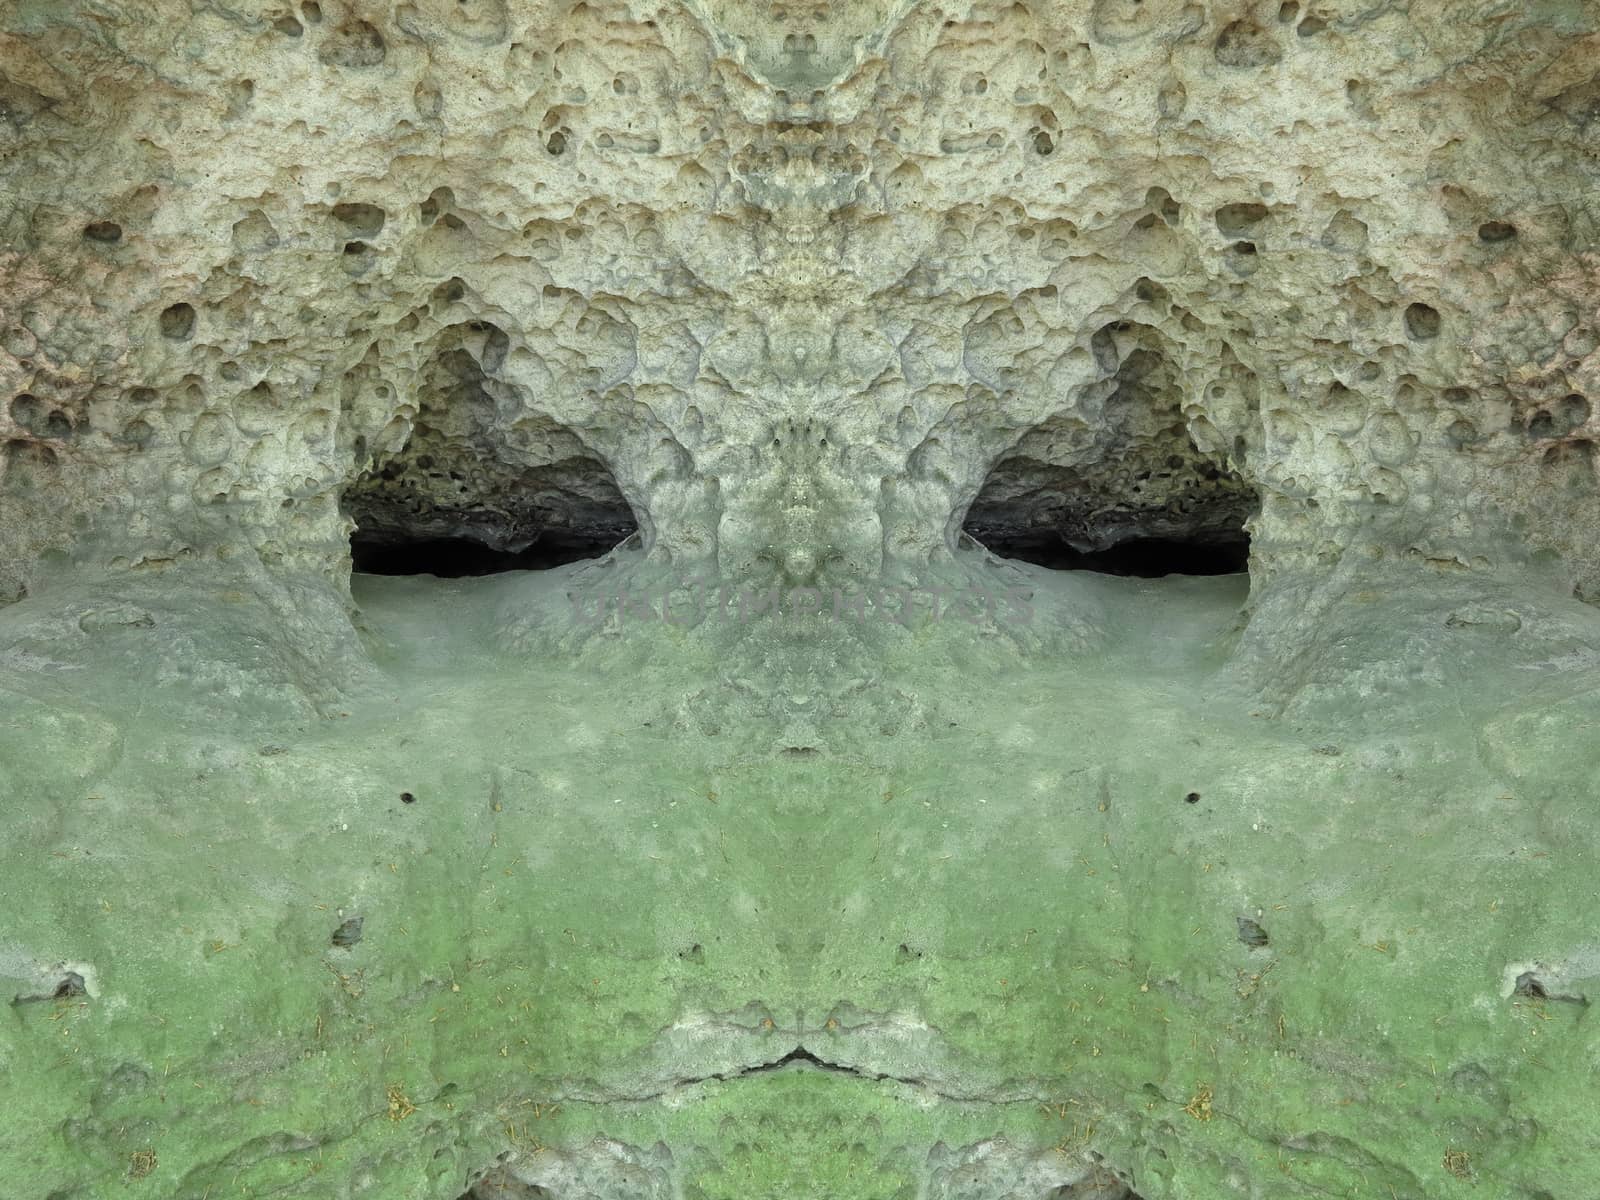 The silent rock - bizarre rock formation - digitally altered